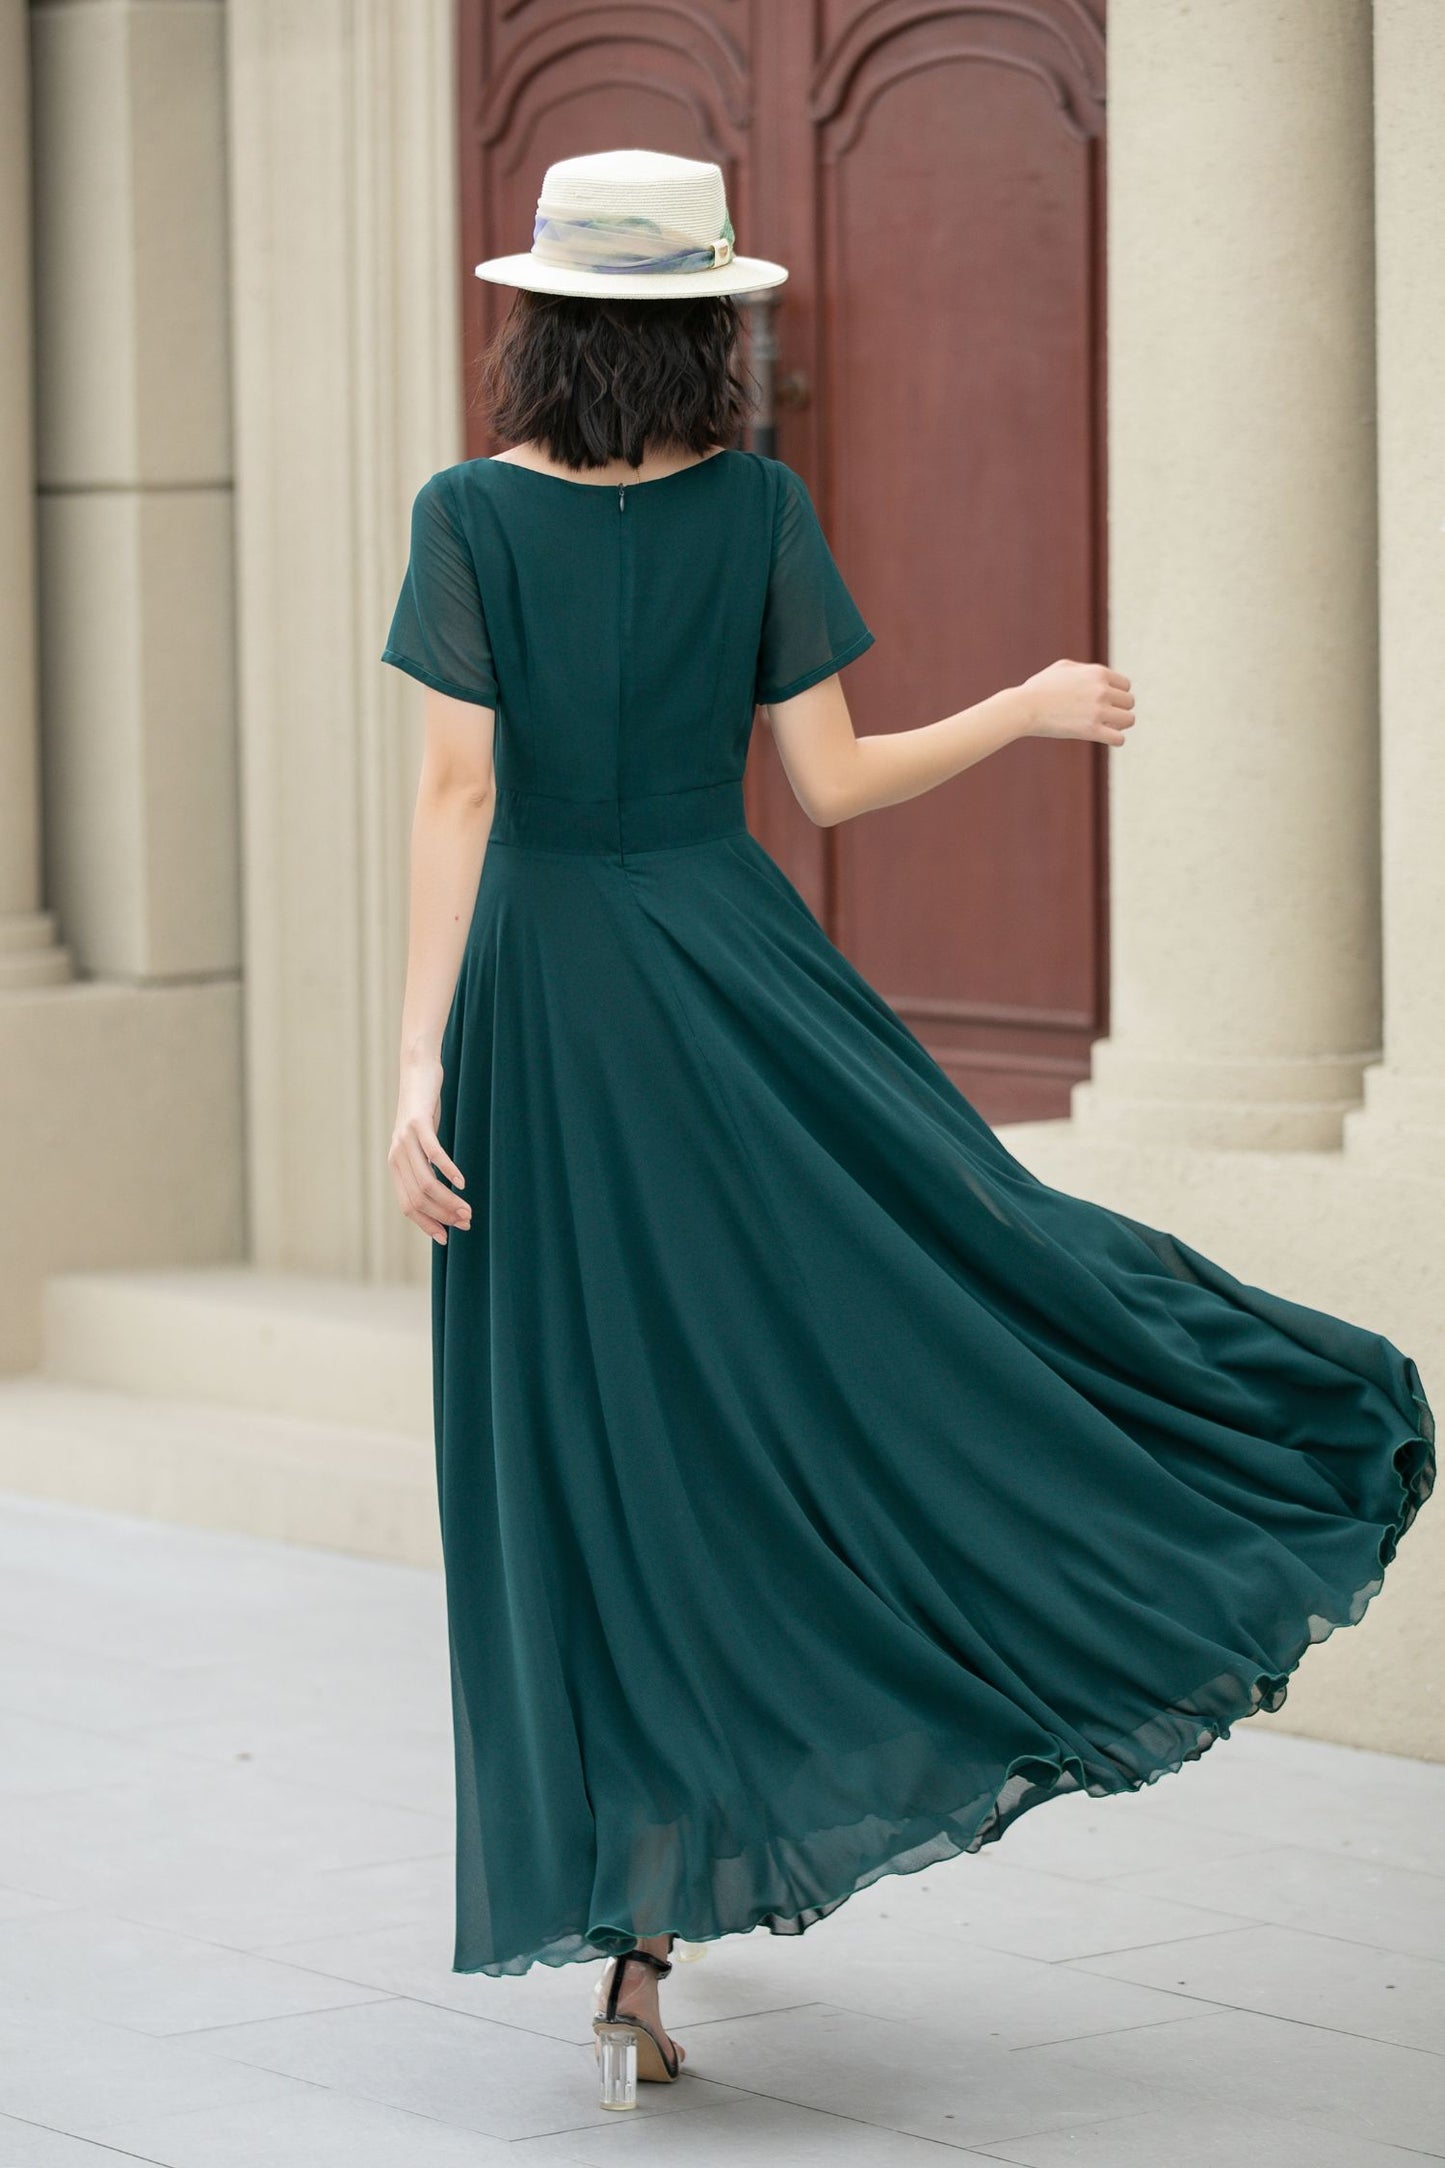 Fit and flare green summer chiffon dresses 5144